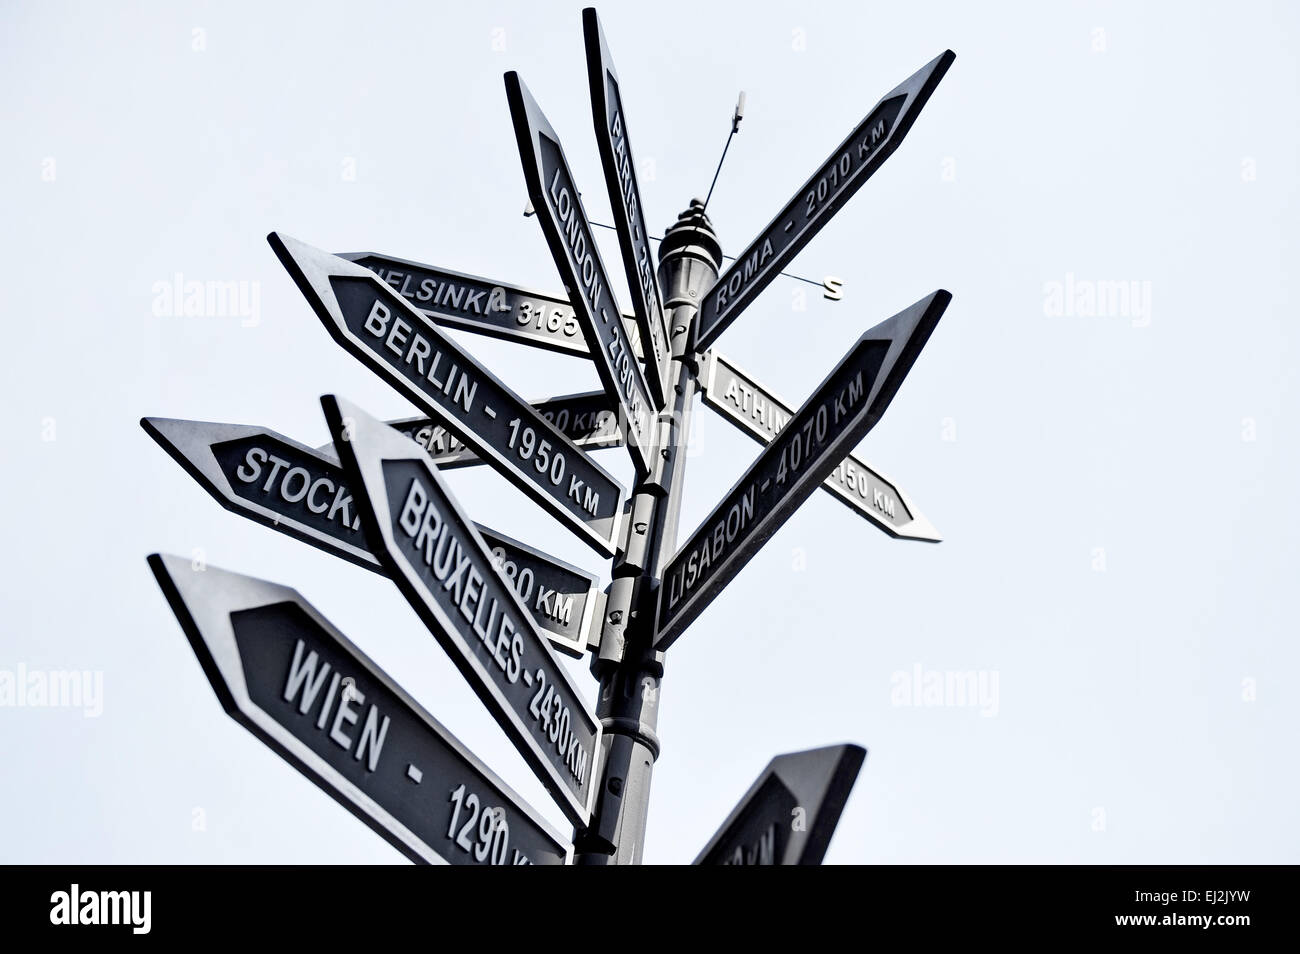 Street signpost showing distance to Europe capital cities Stock Photo